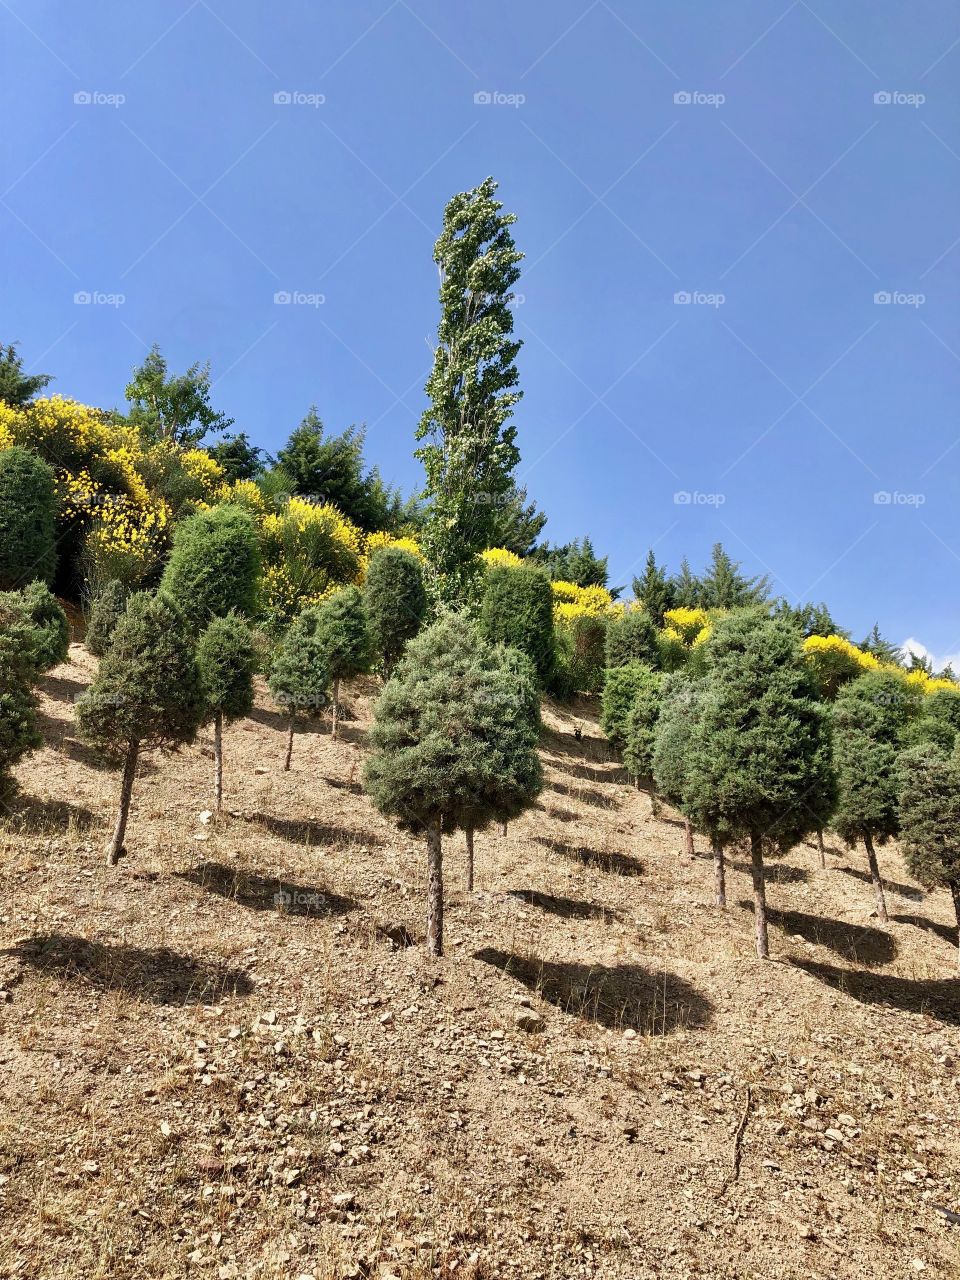 Trees on the hill in Iran 